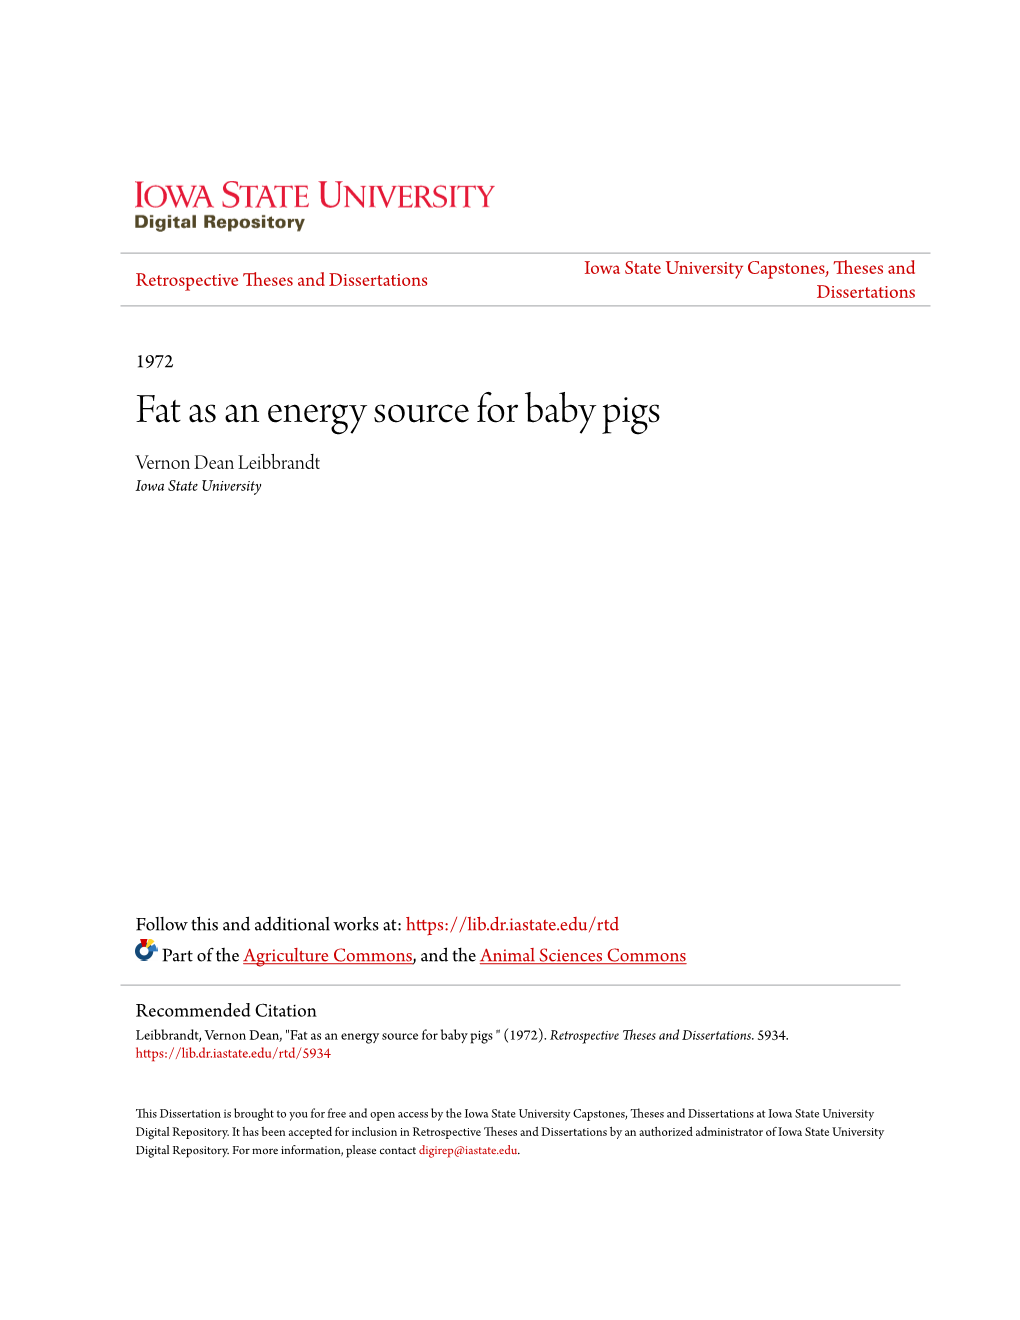 Fat As an Energy Source for Baby Pigs Vernon Dean Leibbrandt Iowa State University